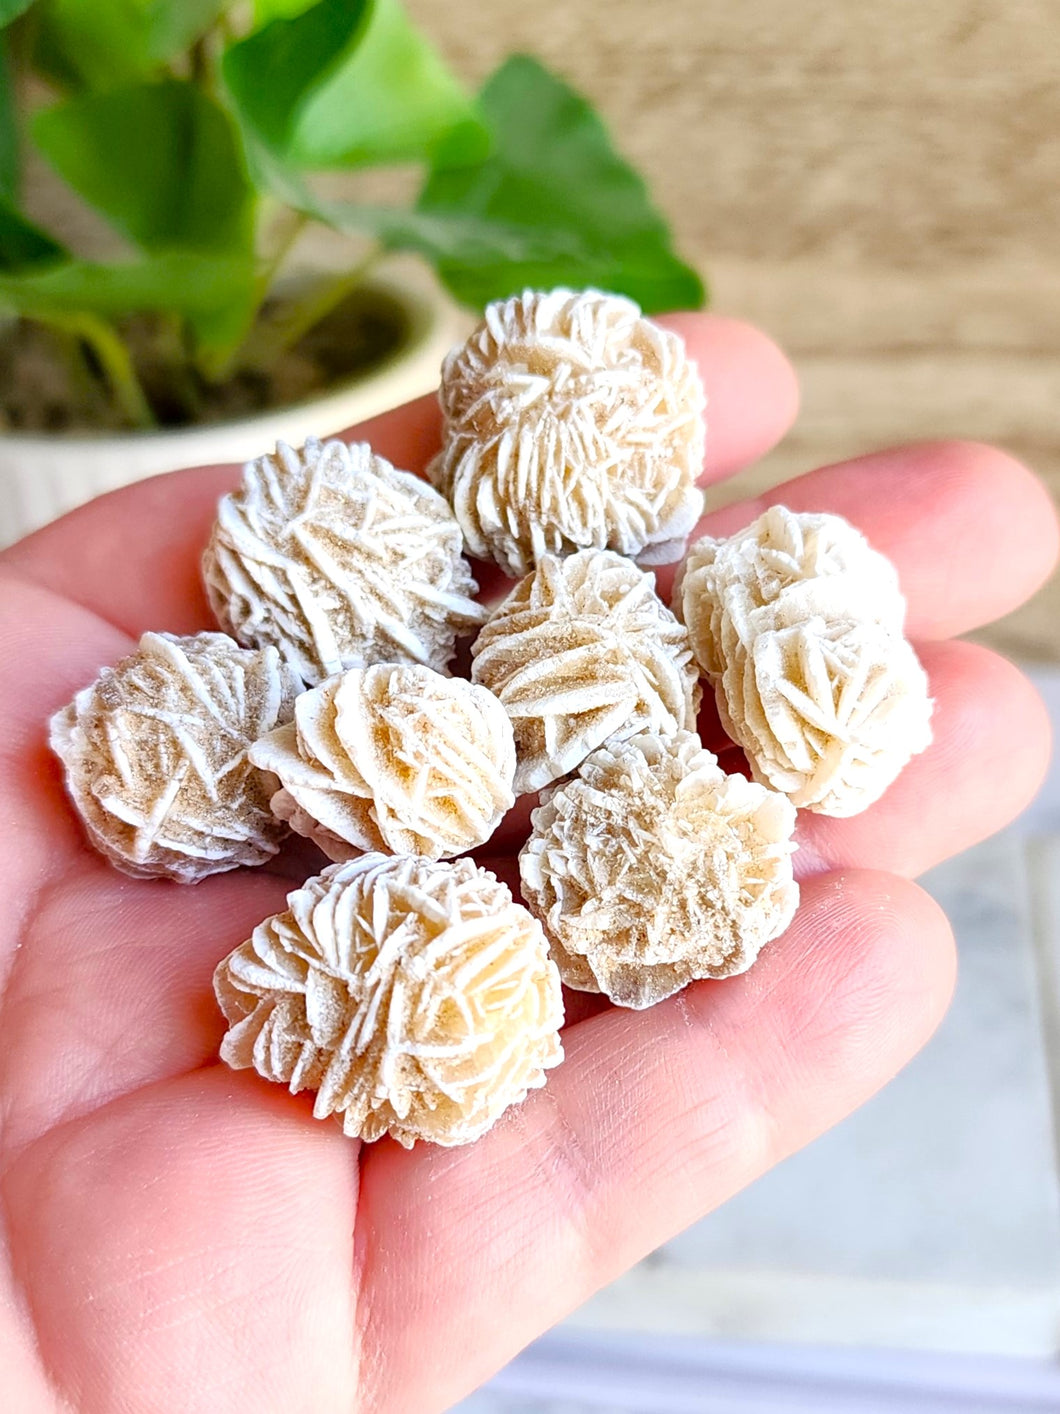 Explore Desert Rose for grounding, clarity, and spiritual connection with the desert's energy, fostering personal growth and harmony